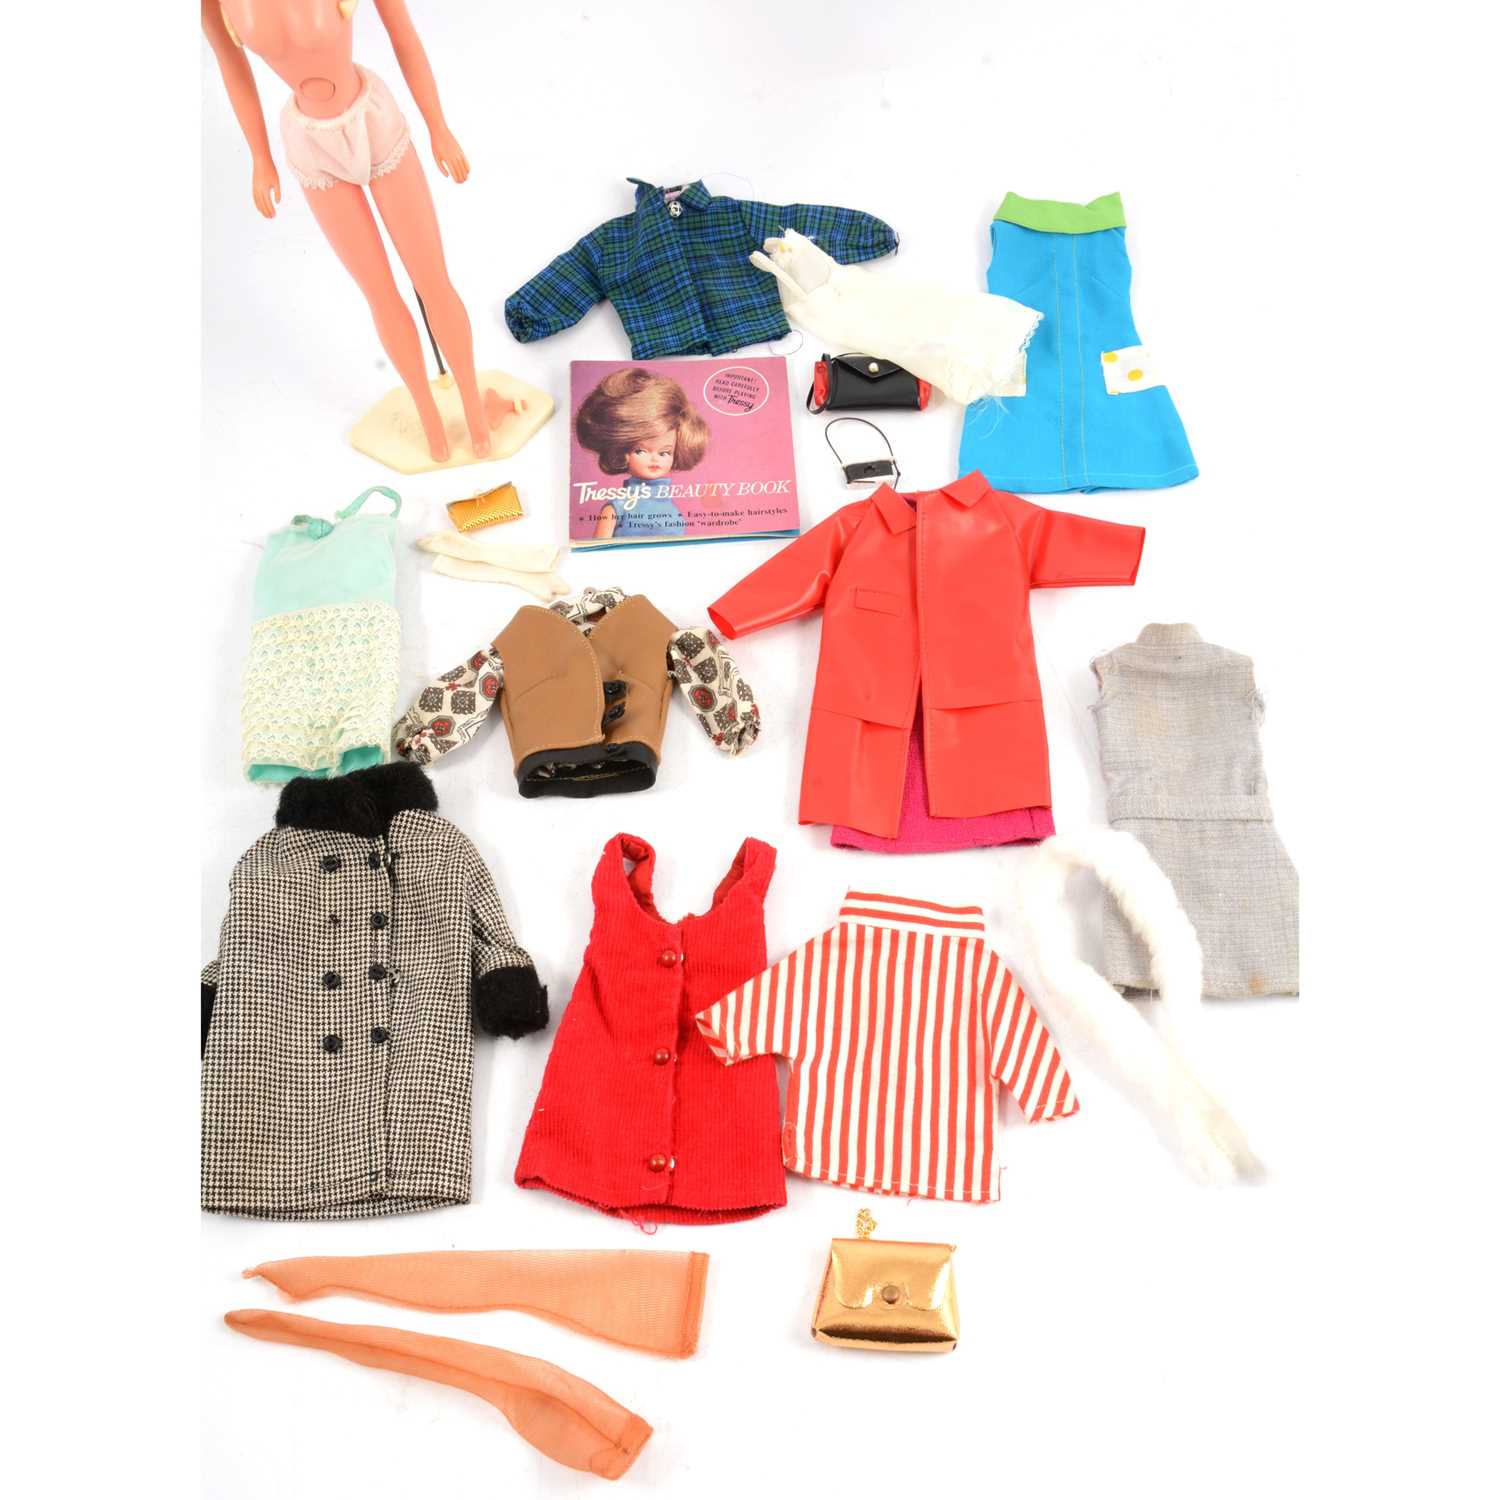 Tressy doll with a good selection of outfits - Image 3 of 3